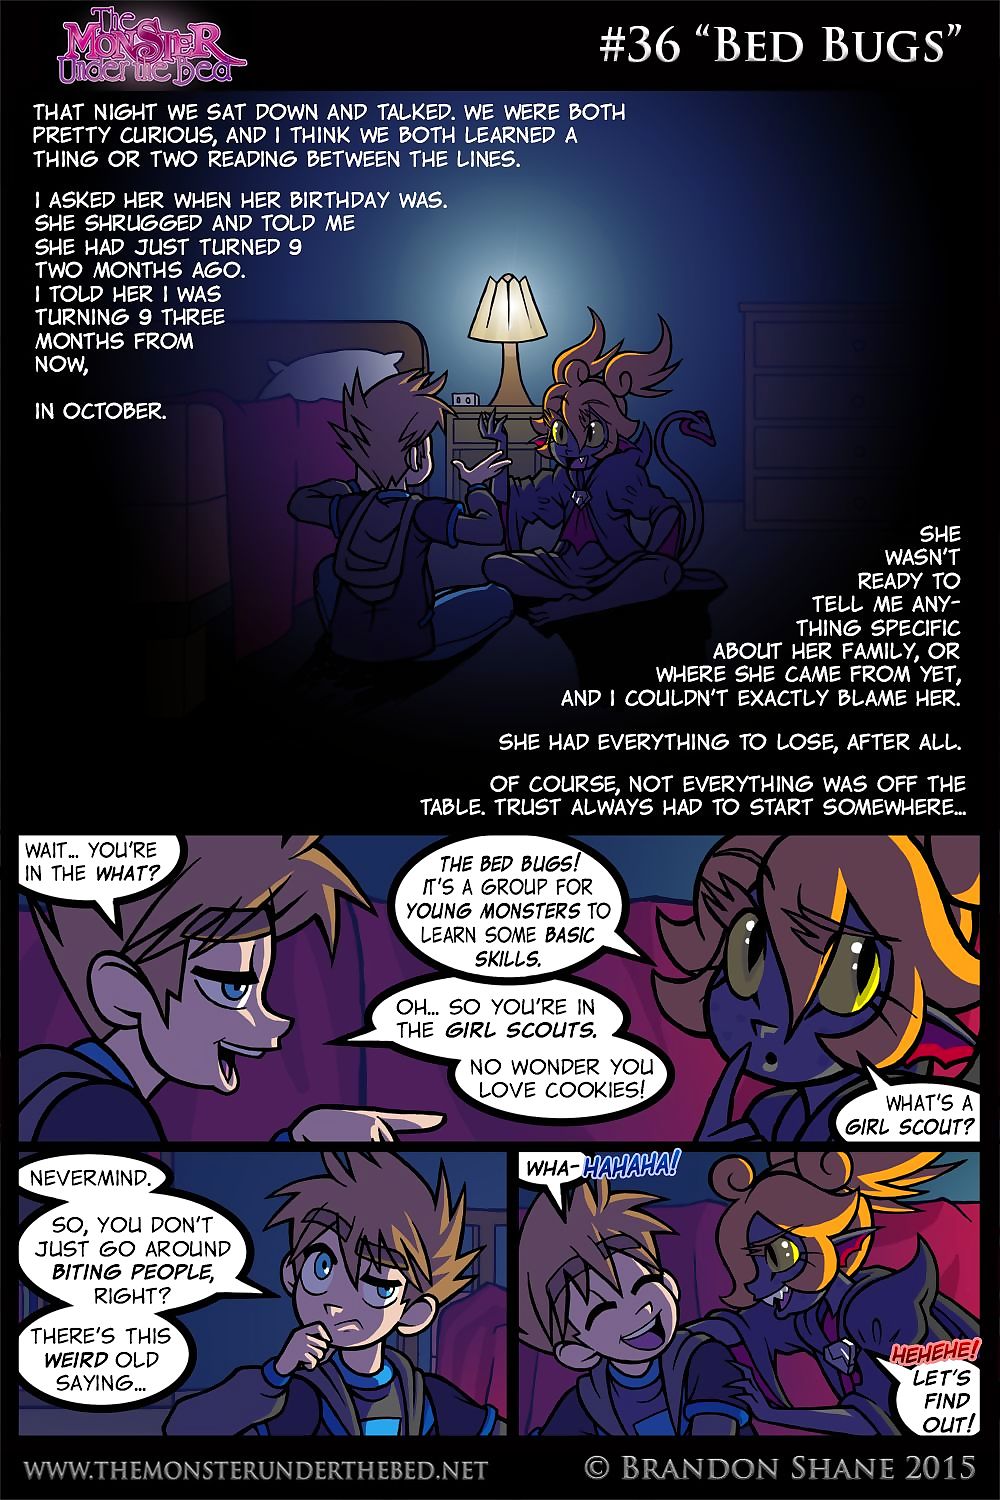 The Monster Under the Bed - part 2